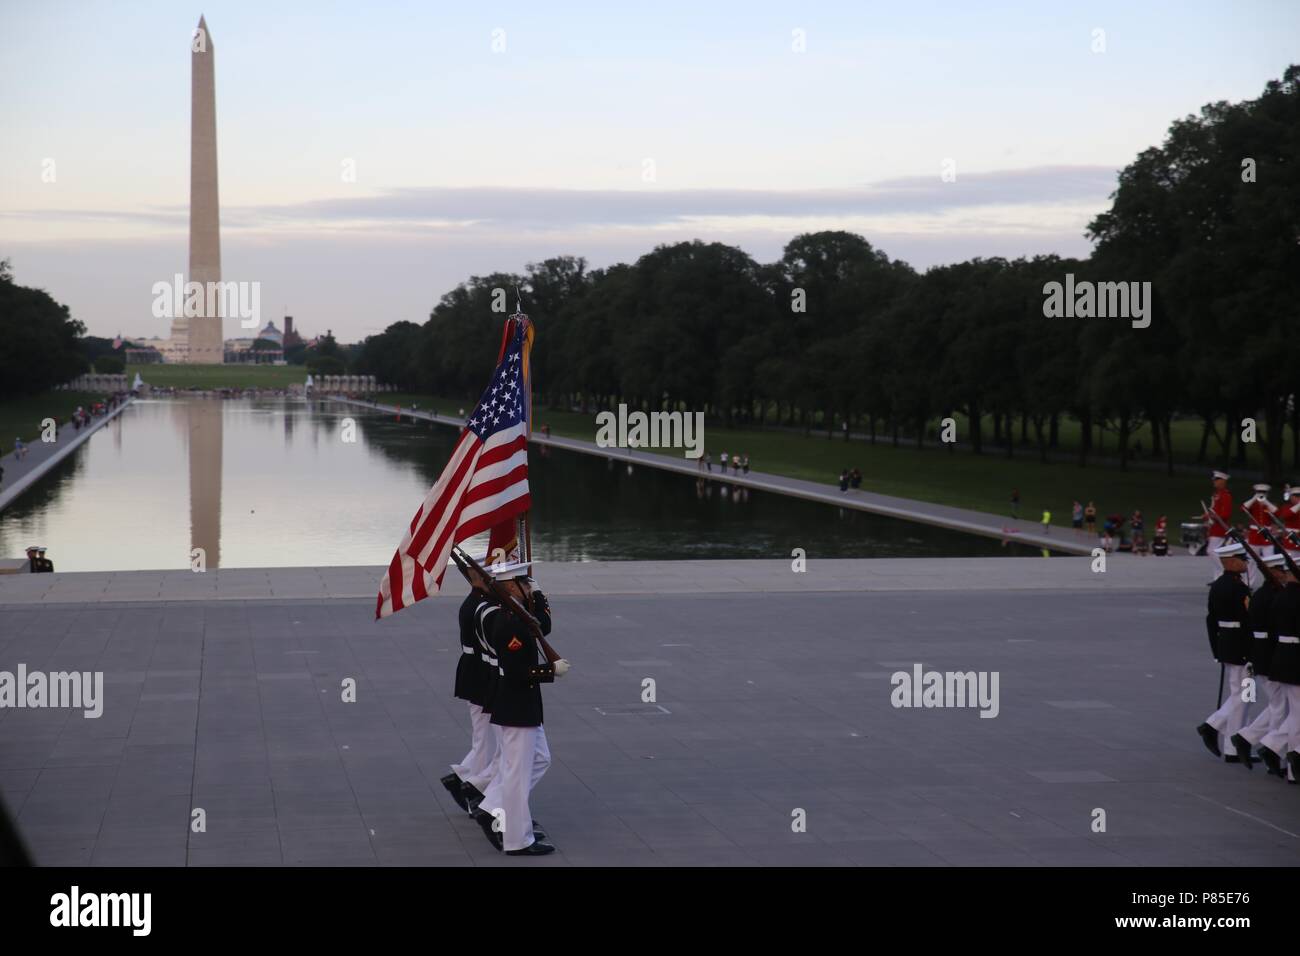 Marines with the U.S. Marine Corps Color Guard march the National Ensign and the U.S. Marine Corps Battle Colors across the parade deck during the Tuesday Sunset Parade at the Lincoln Memorial, Washington D.C. June 12, 2018, June 12, 2018. This year is the first year Barracks Marines are hosting Tuesday Sunset Parades at the Lincoln Memorial. The guest of honor for the parade was Secretary of the Interior Ryan Zinke and the hosting official was Robert D. Hogue, counsel for the commandant of the Marine Corps. () Stock Photo